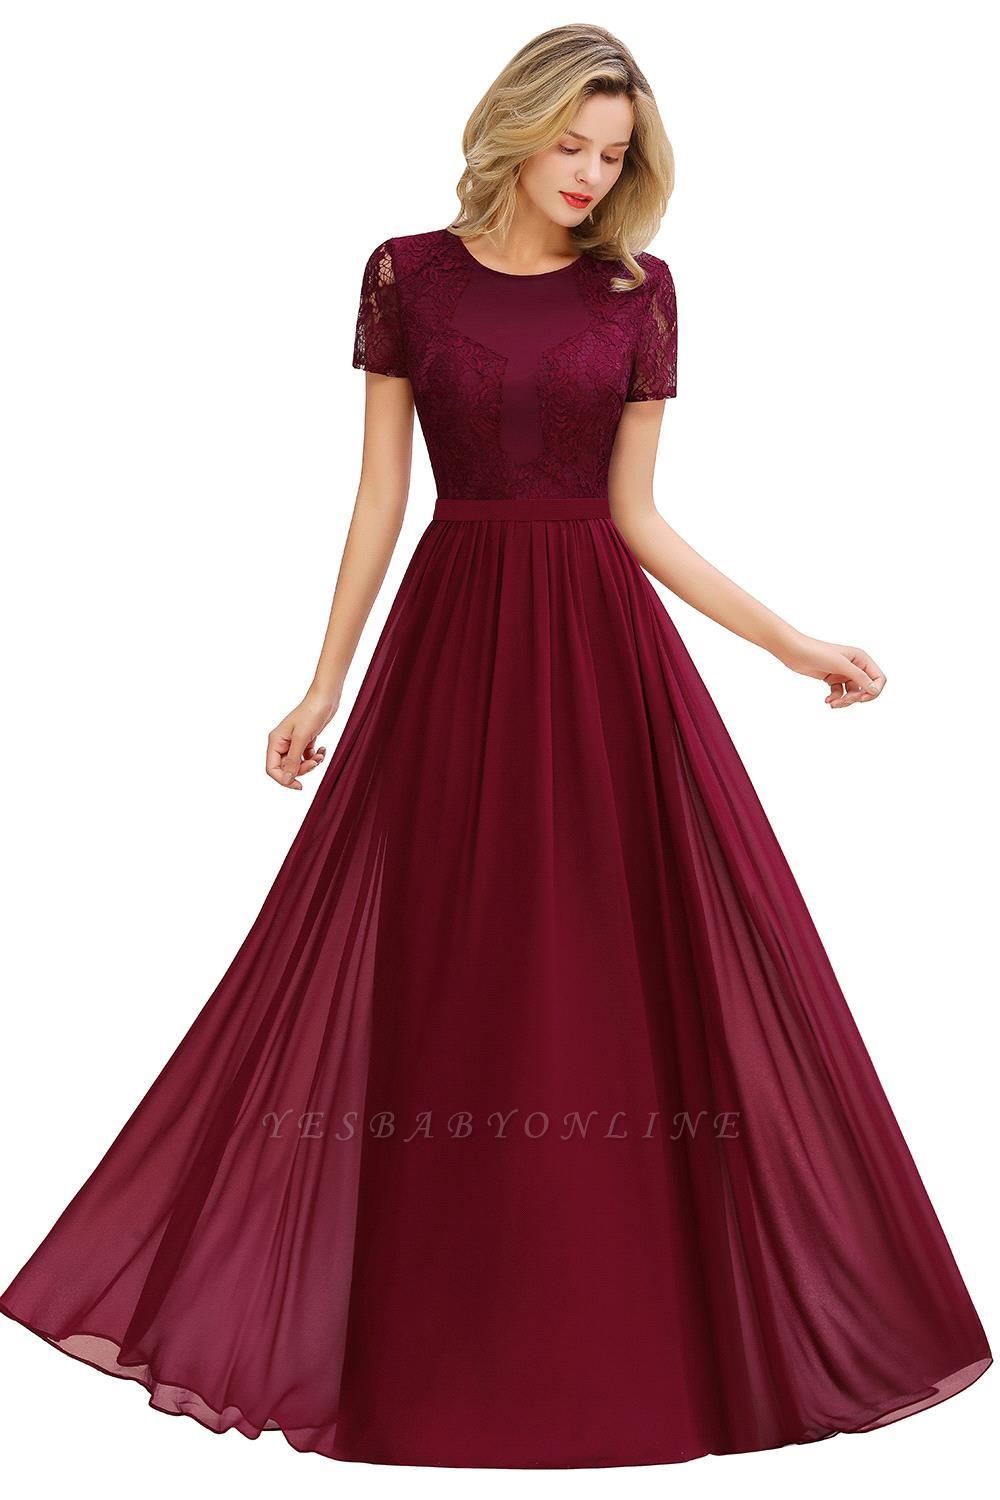 A-line Chiffon Lace Bridesmaid Dress with Short Sleeves